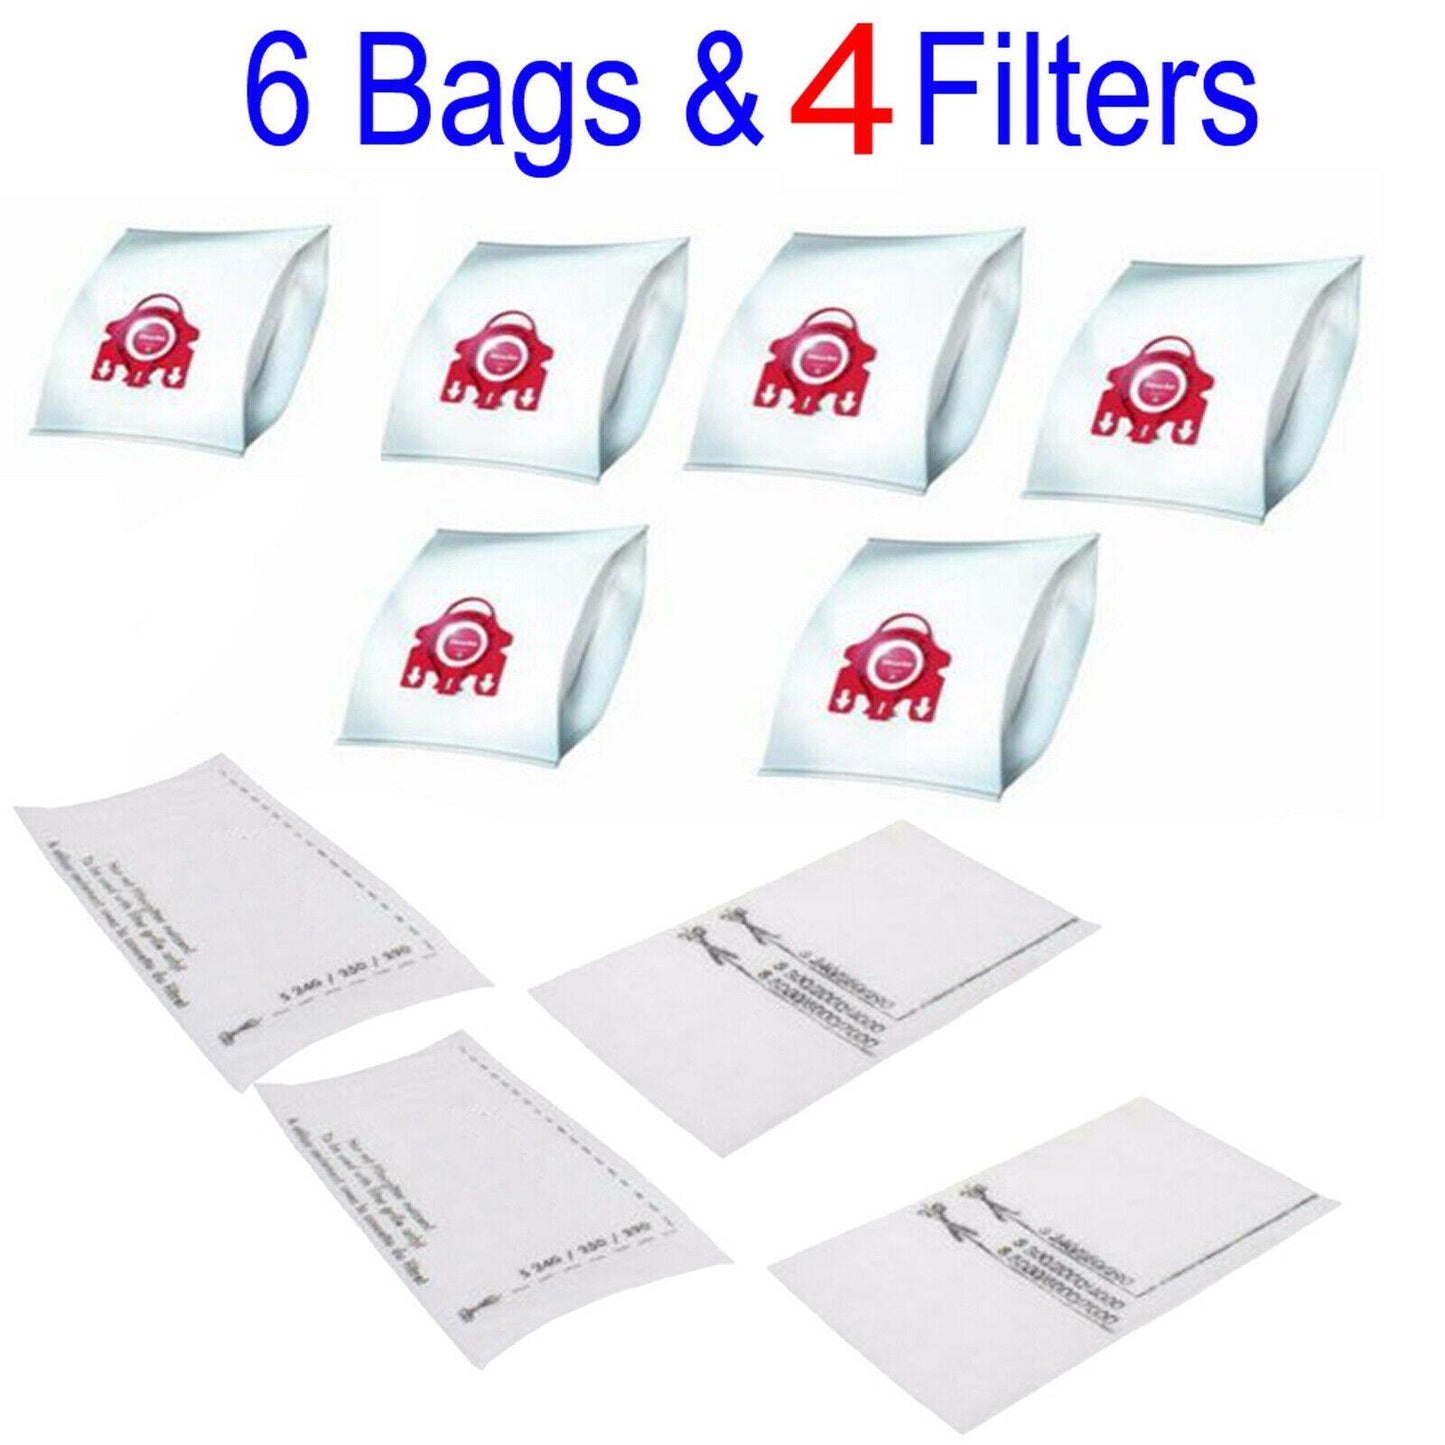 6 x Vacuum Cleaner Bags + 4 Filters For Miele FJM S728 S734 S736 S738 S744 S745 Sparesbarn